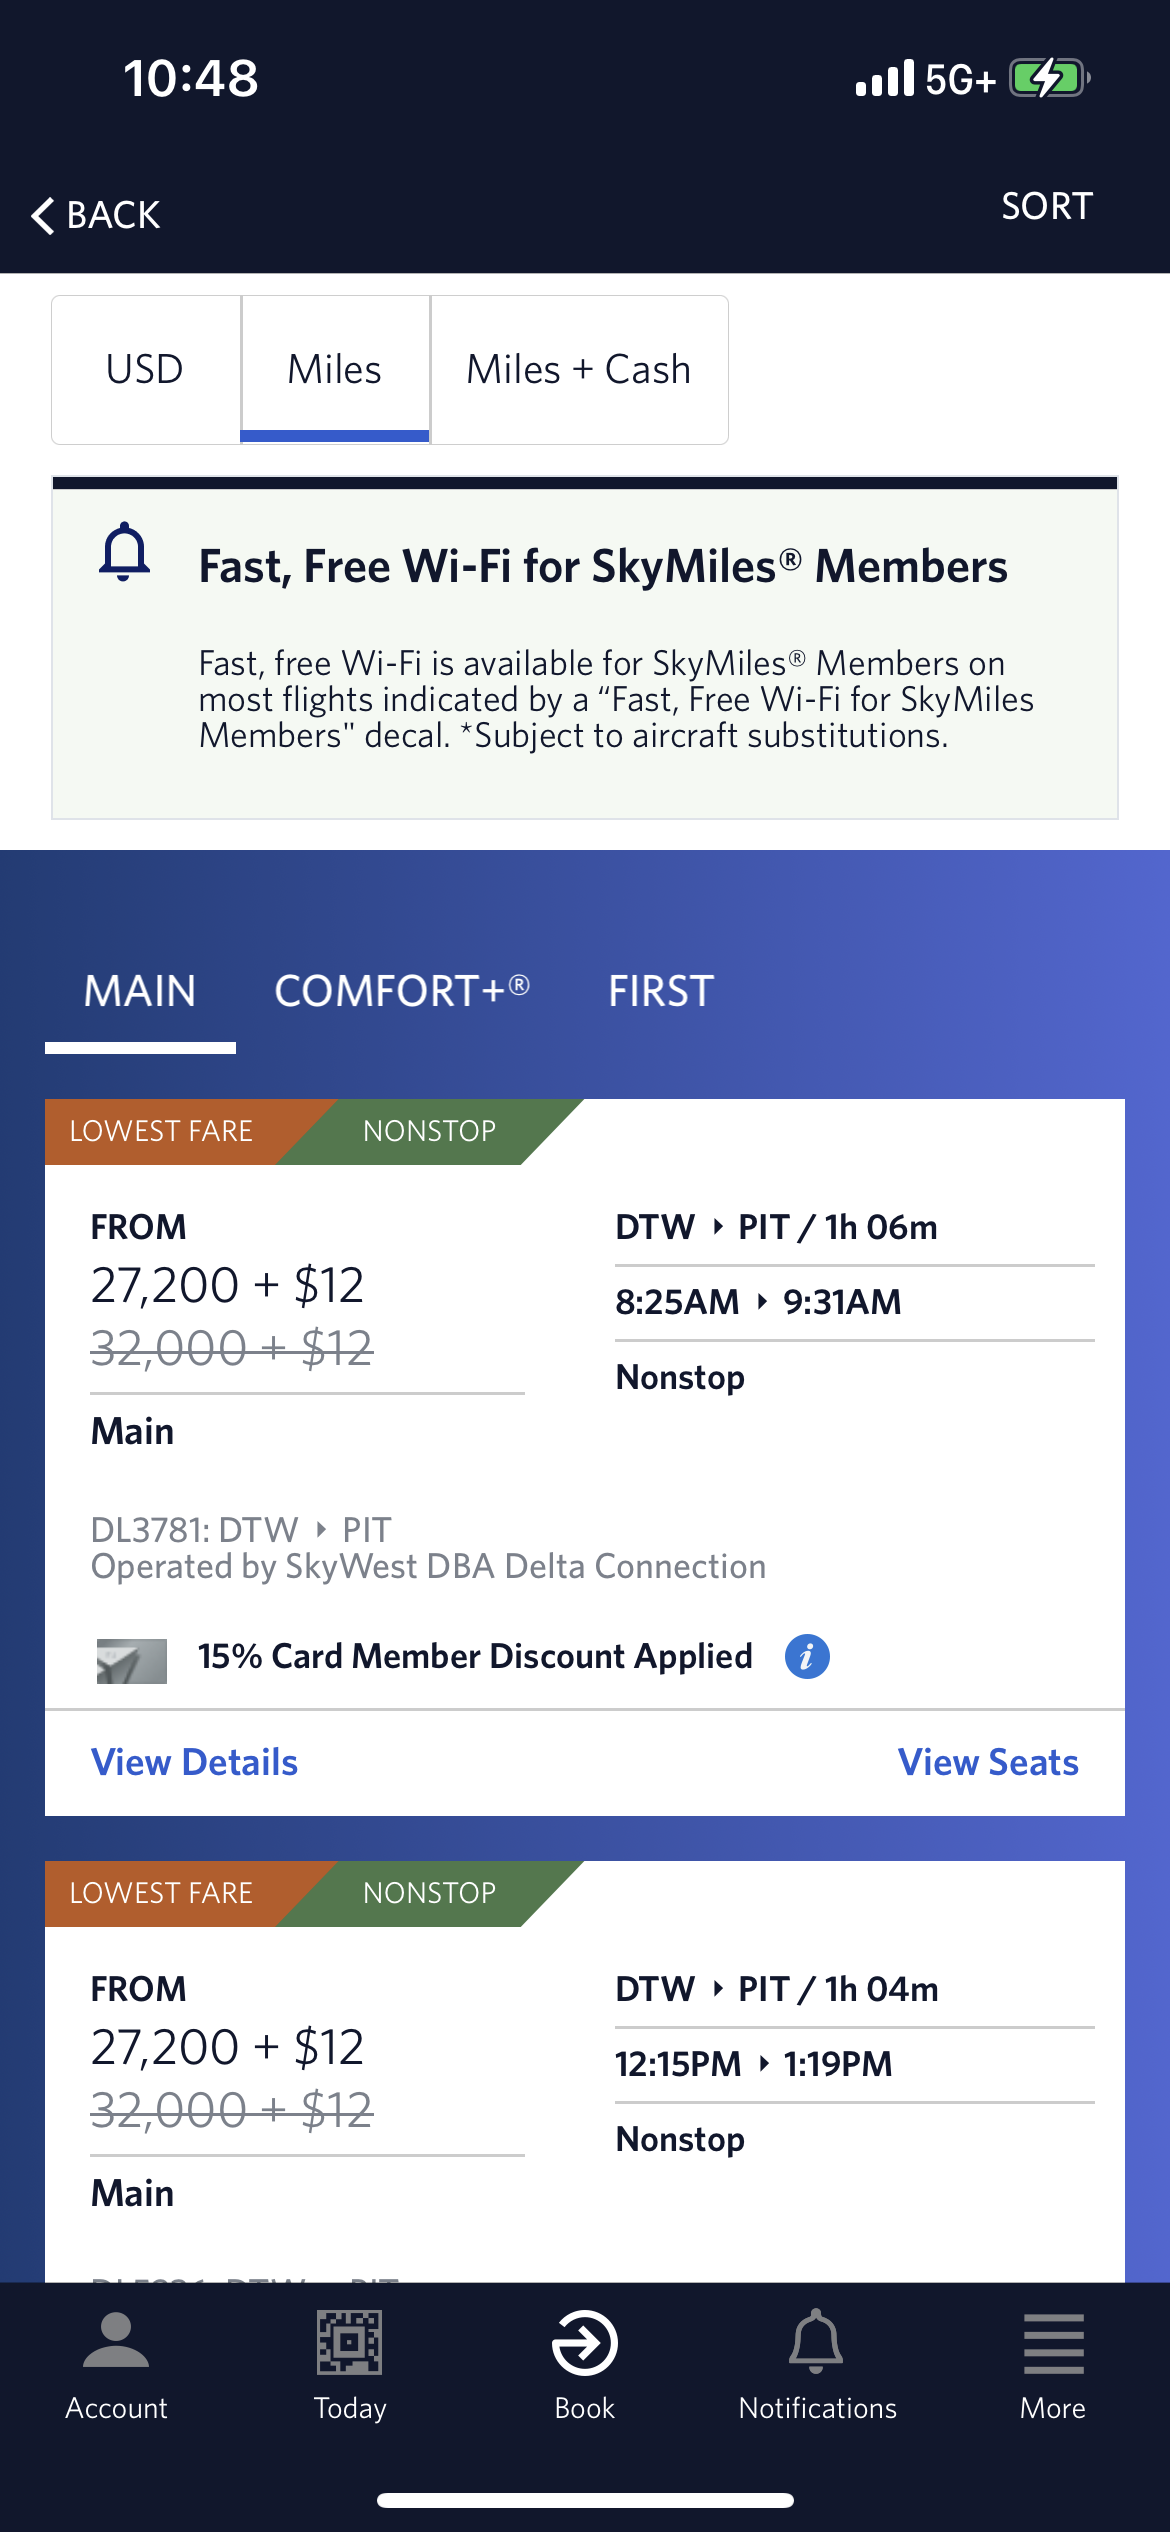 The cost of a Delta flight from Detroit to Pittsburgh using points.